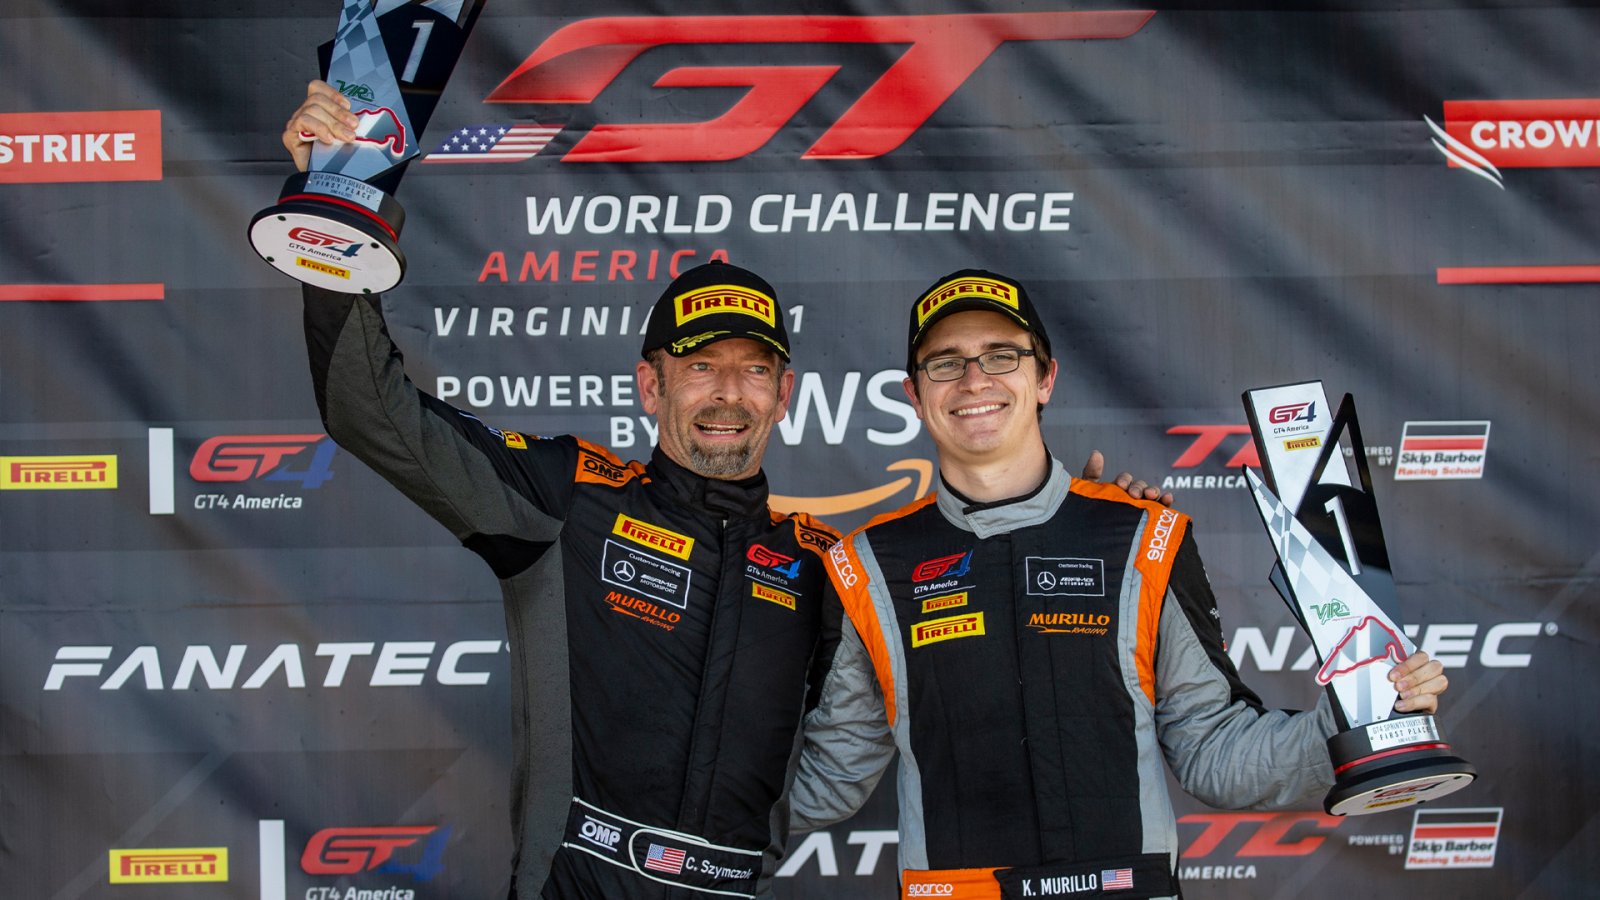 Kenny Murillo and Christian Szymczak Secure Overall Pirelli GT4 America Victory in No. 72 Murillo Racing Mercedes-AMG GT4